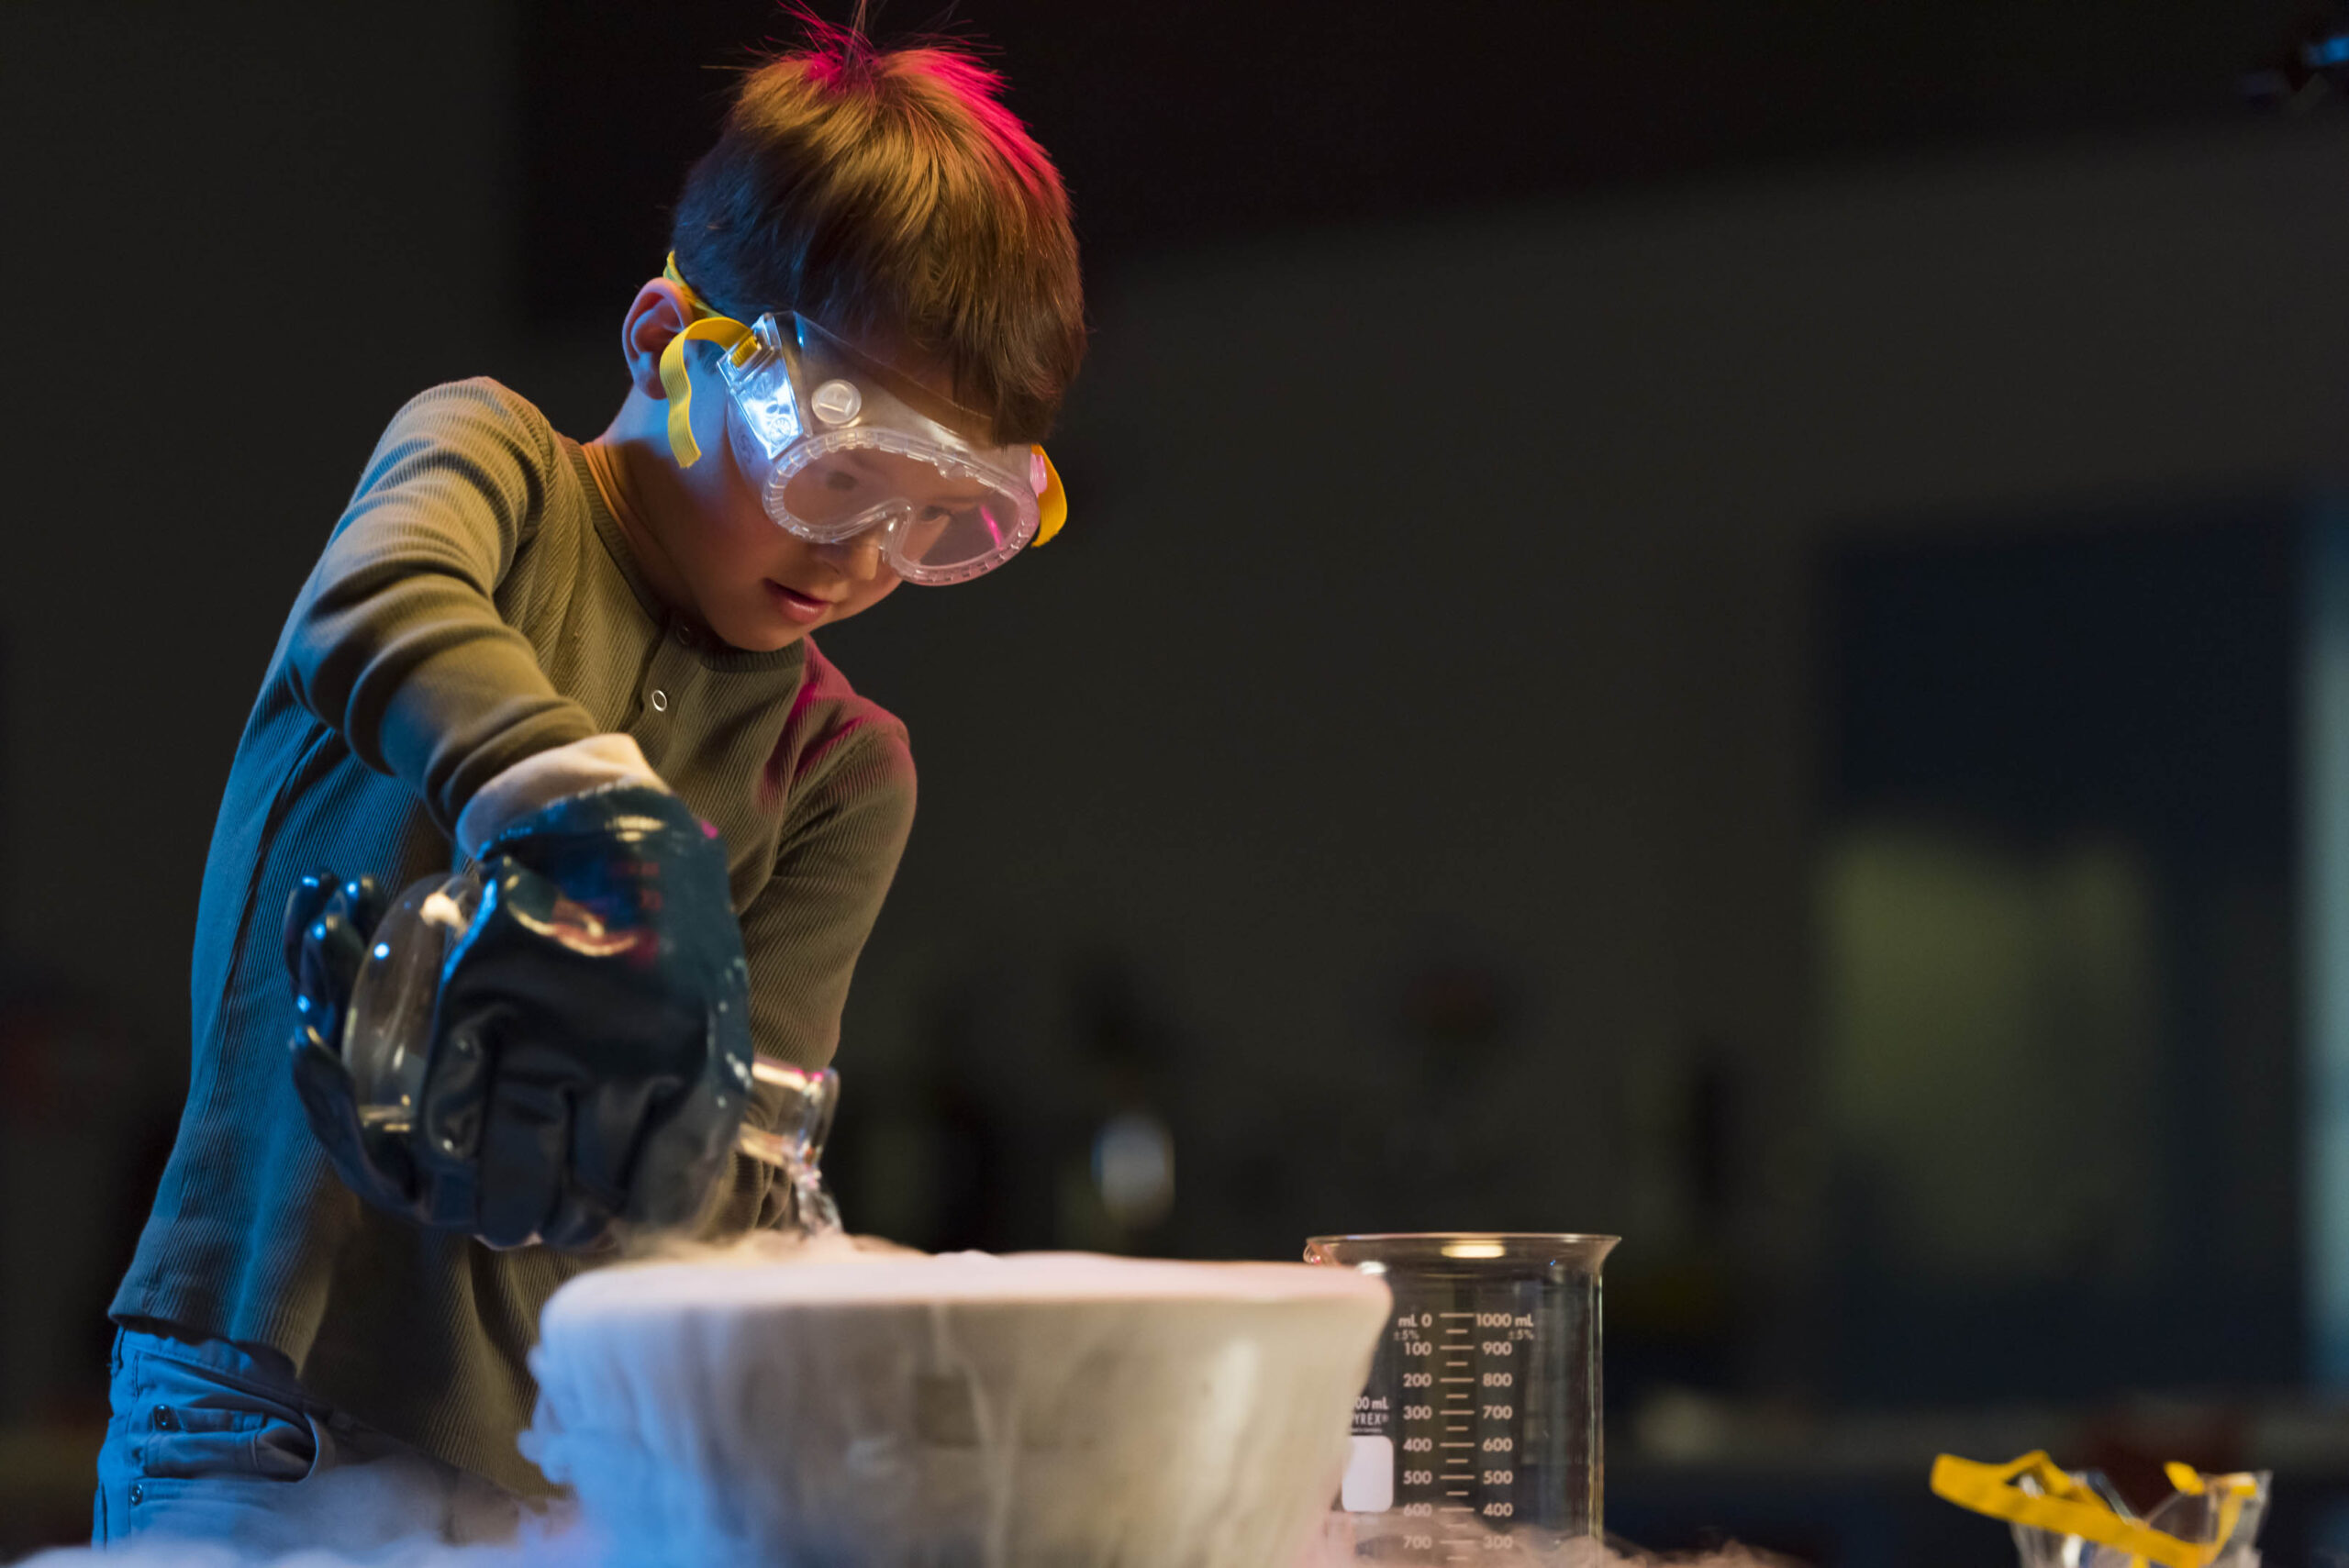 A child is wearing safety glasses and pouring dry ice